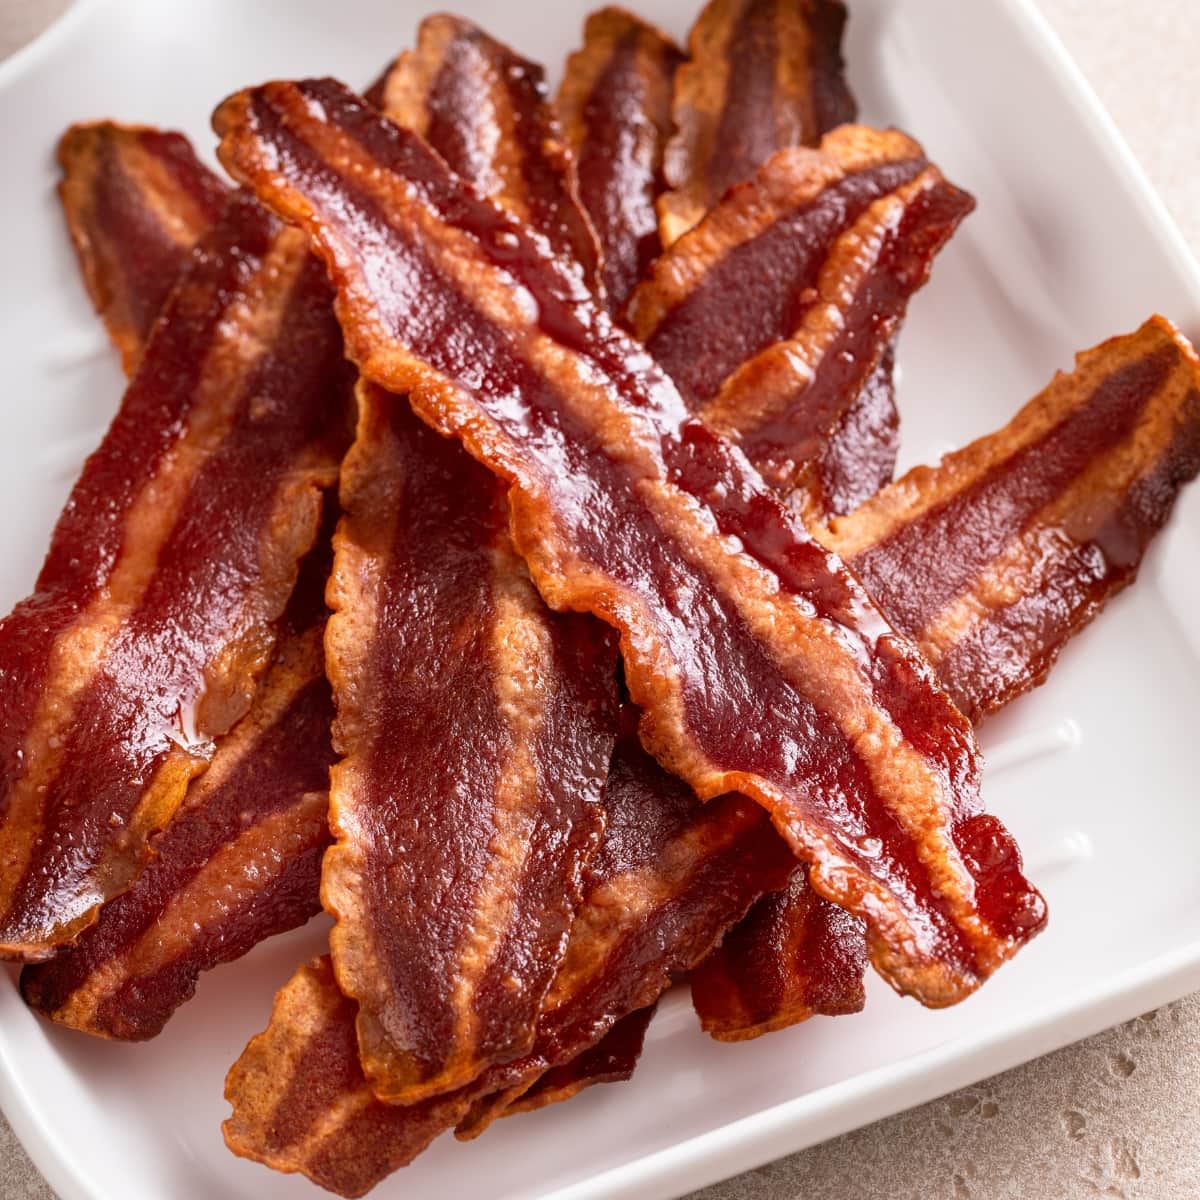 Strips of air fried Turkey bacon on a white plate.